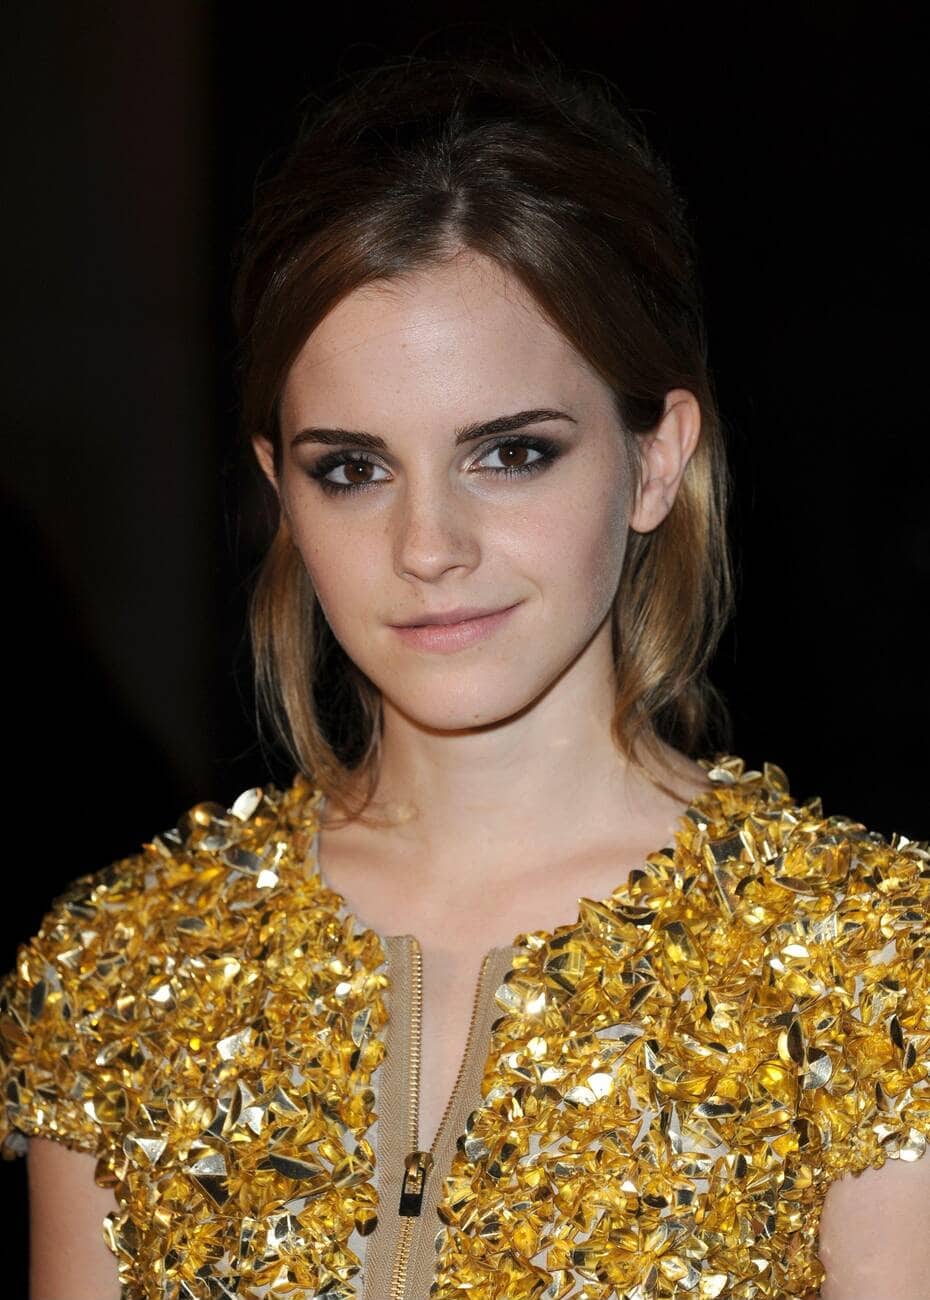 Emma Watson Overshadowed All with a Golden Mini Dress at the Burberry Show